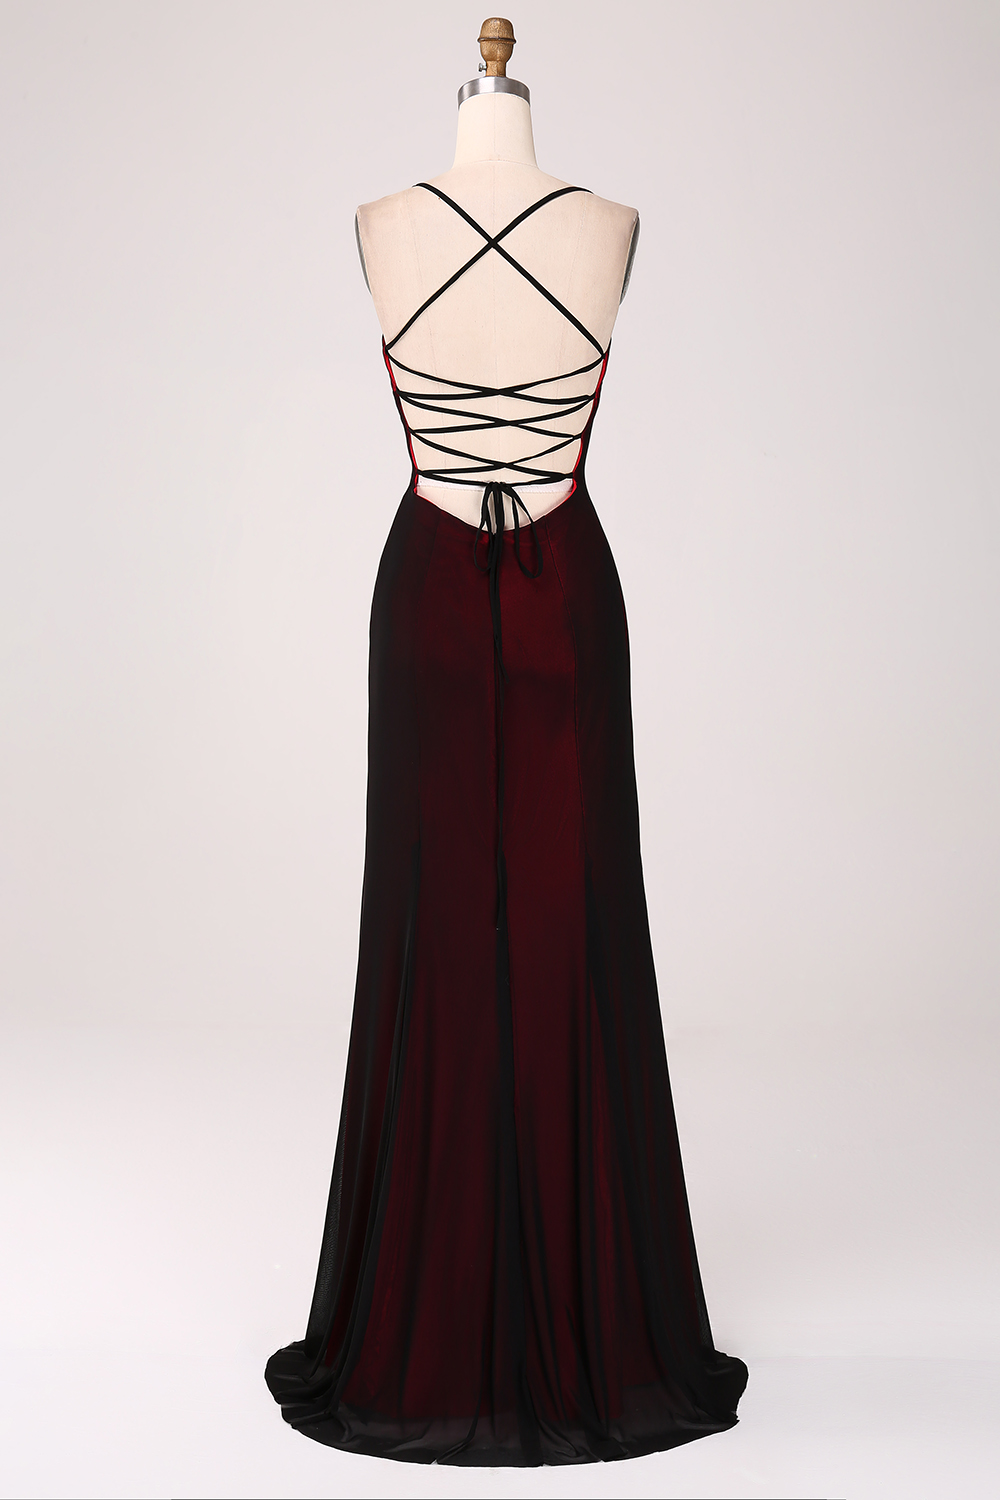 Black Red Spaghetti Straps Mermaid Long Bridesmaid Dress with Lace-up Back 